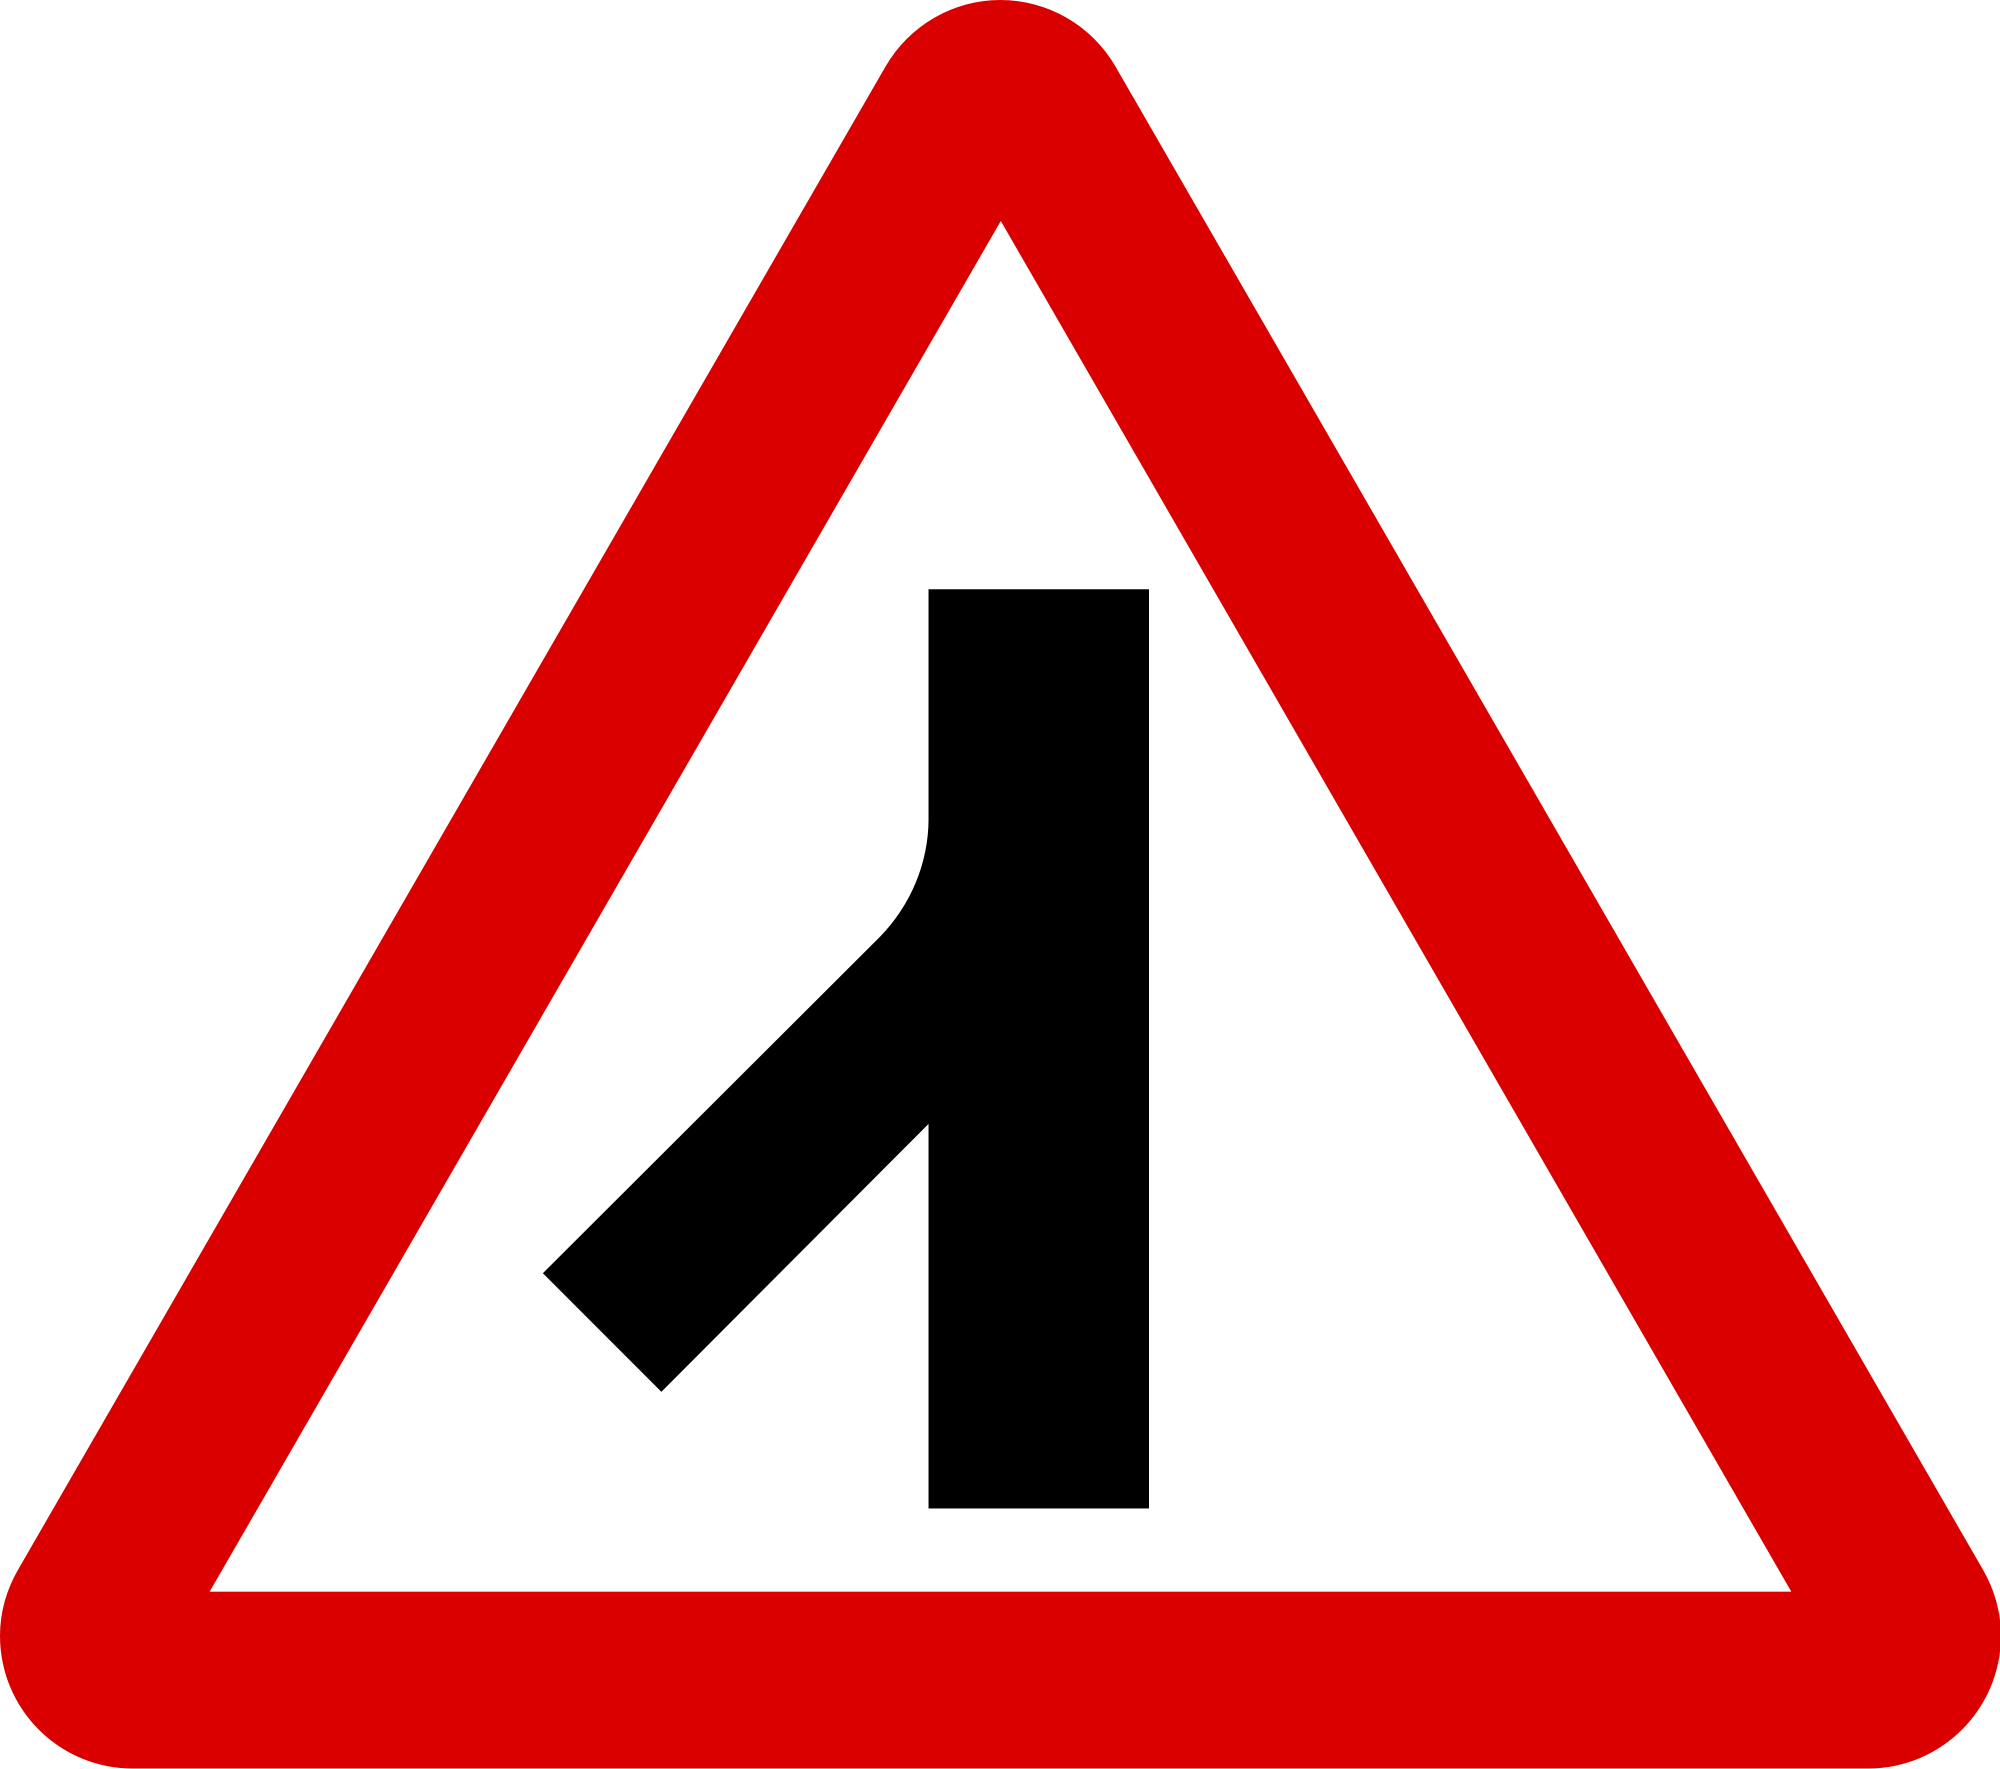 Similar Images For Traffic Road Signs - Traffic Merging From The Right (2000x1769)